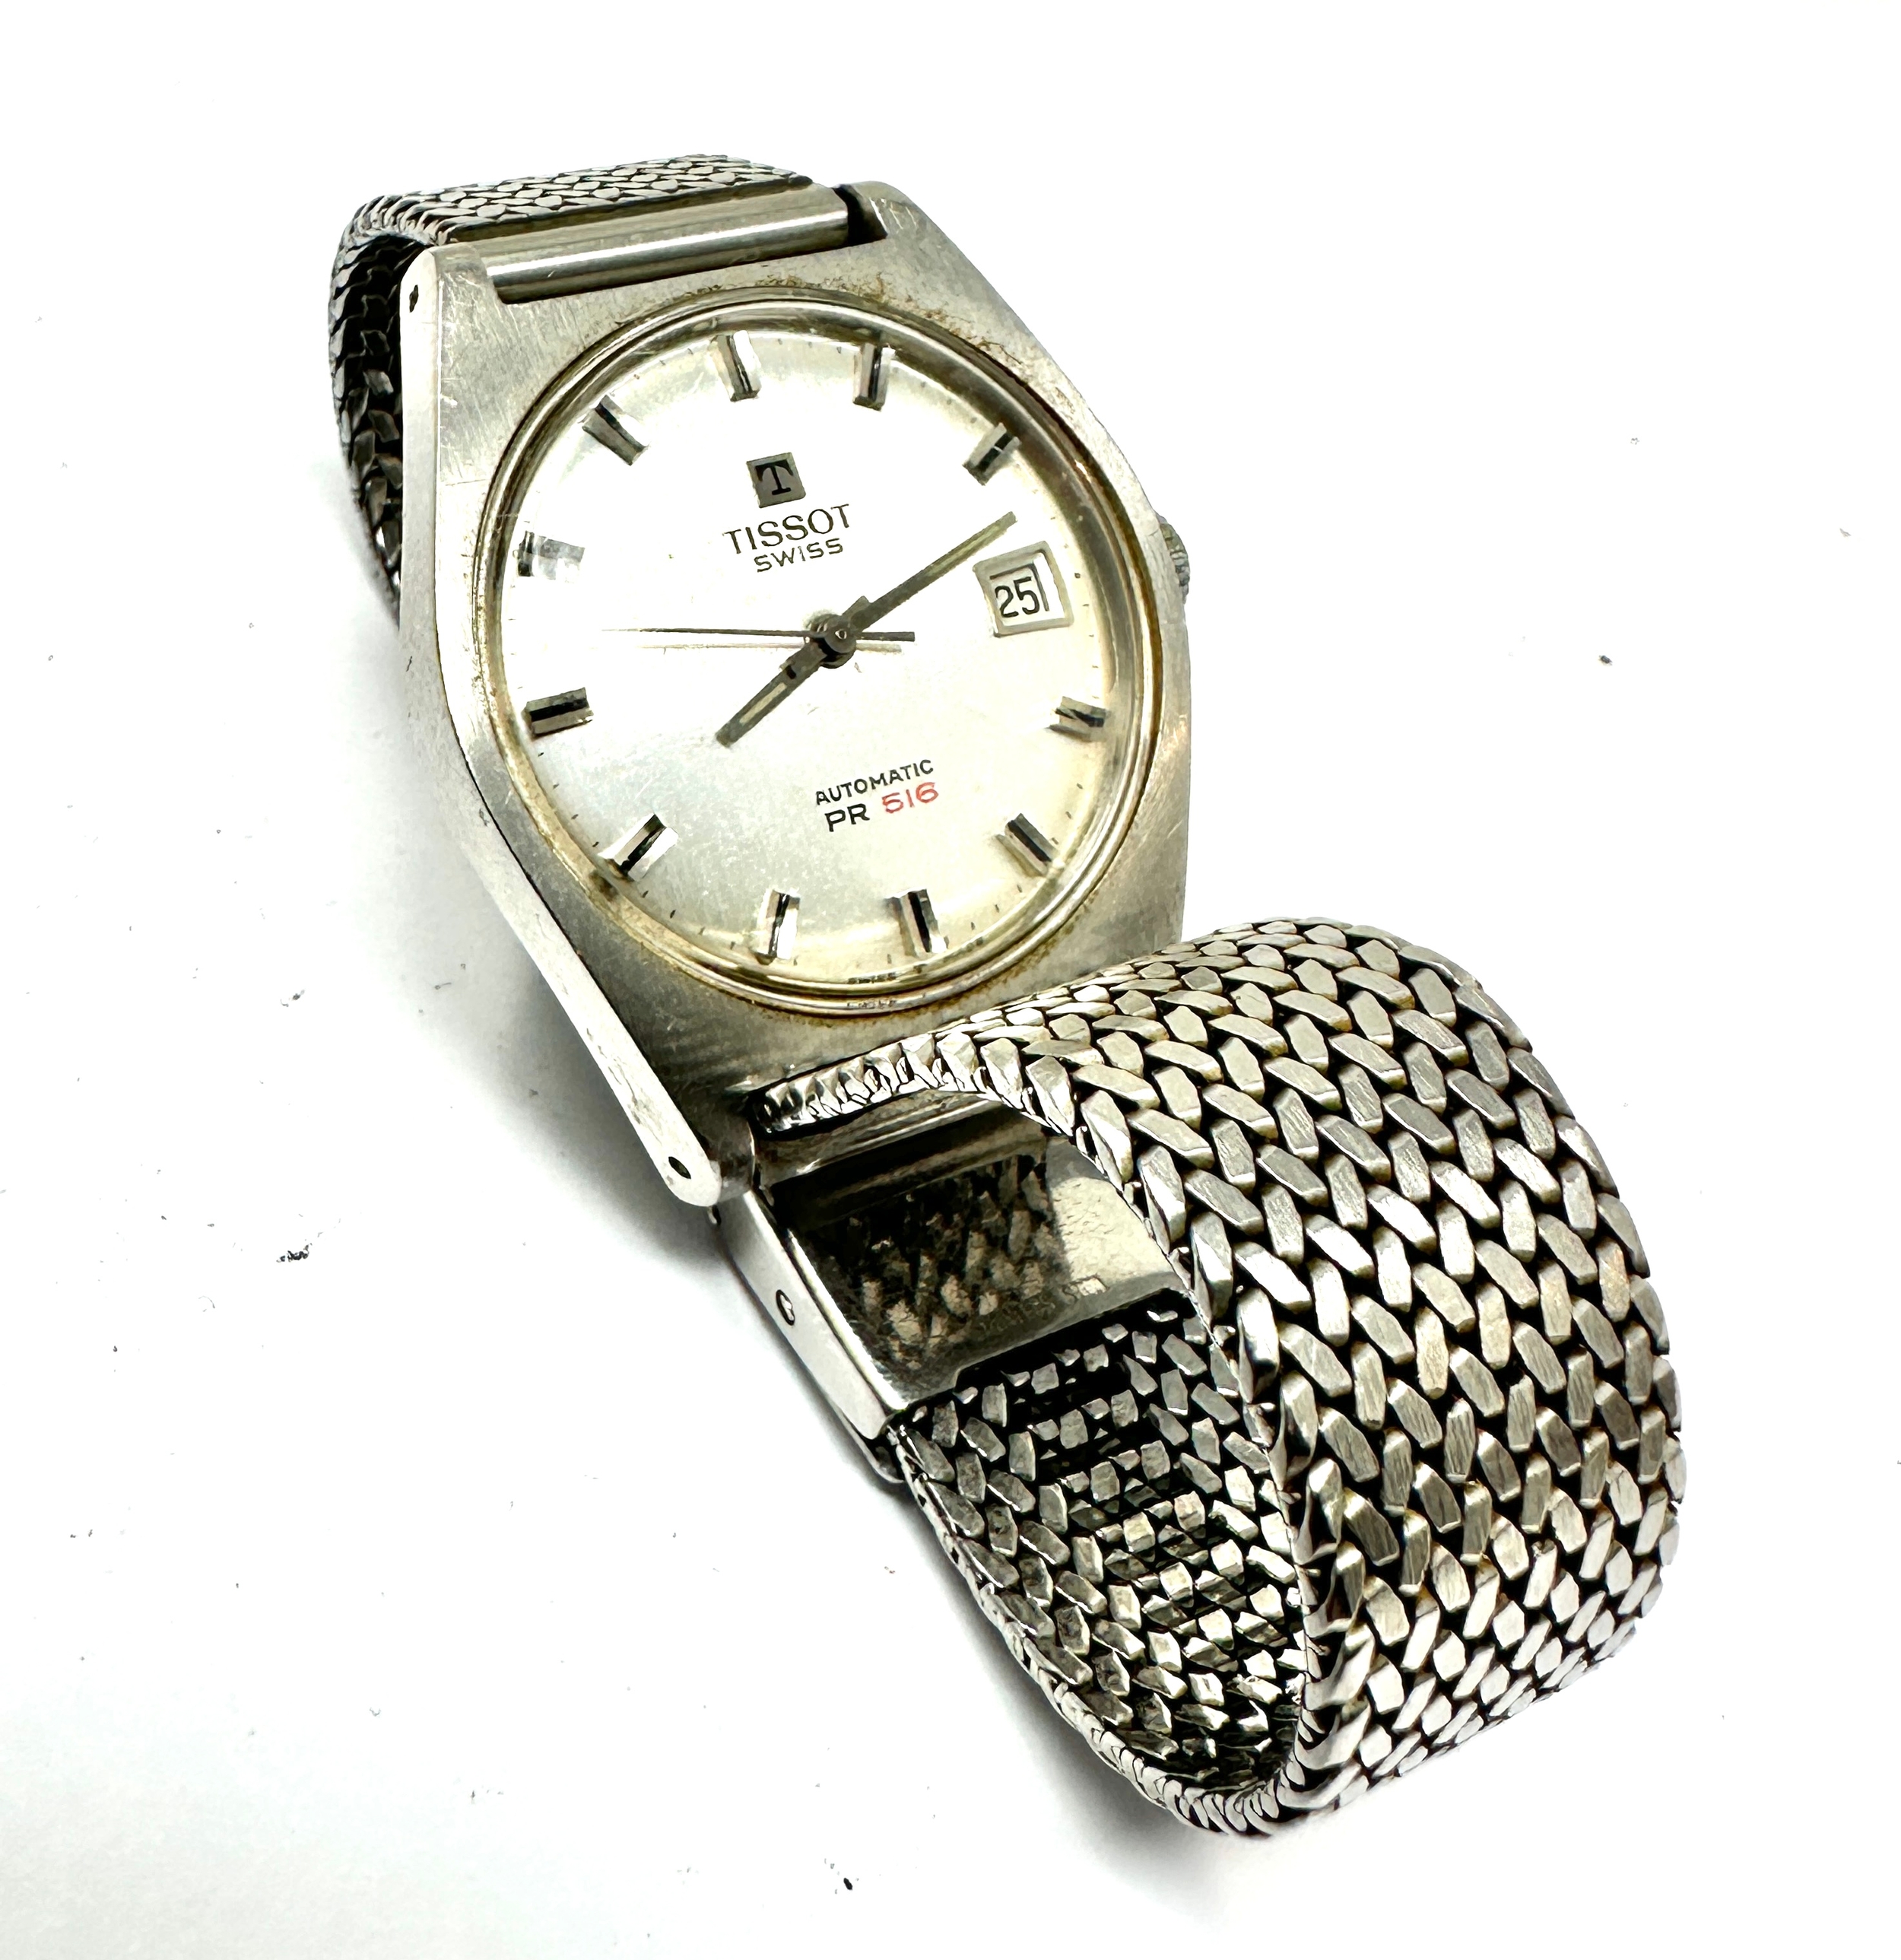 Vintage Tissot Automatic pr516 Date the watch is ticking